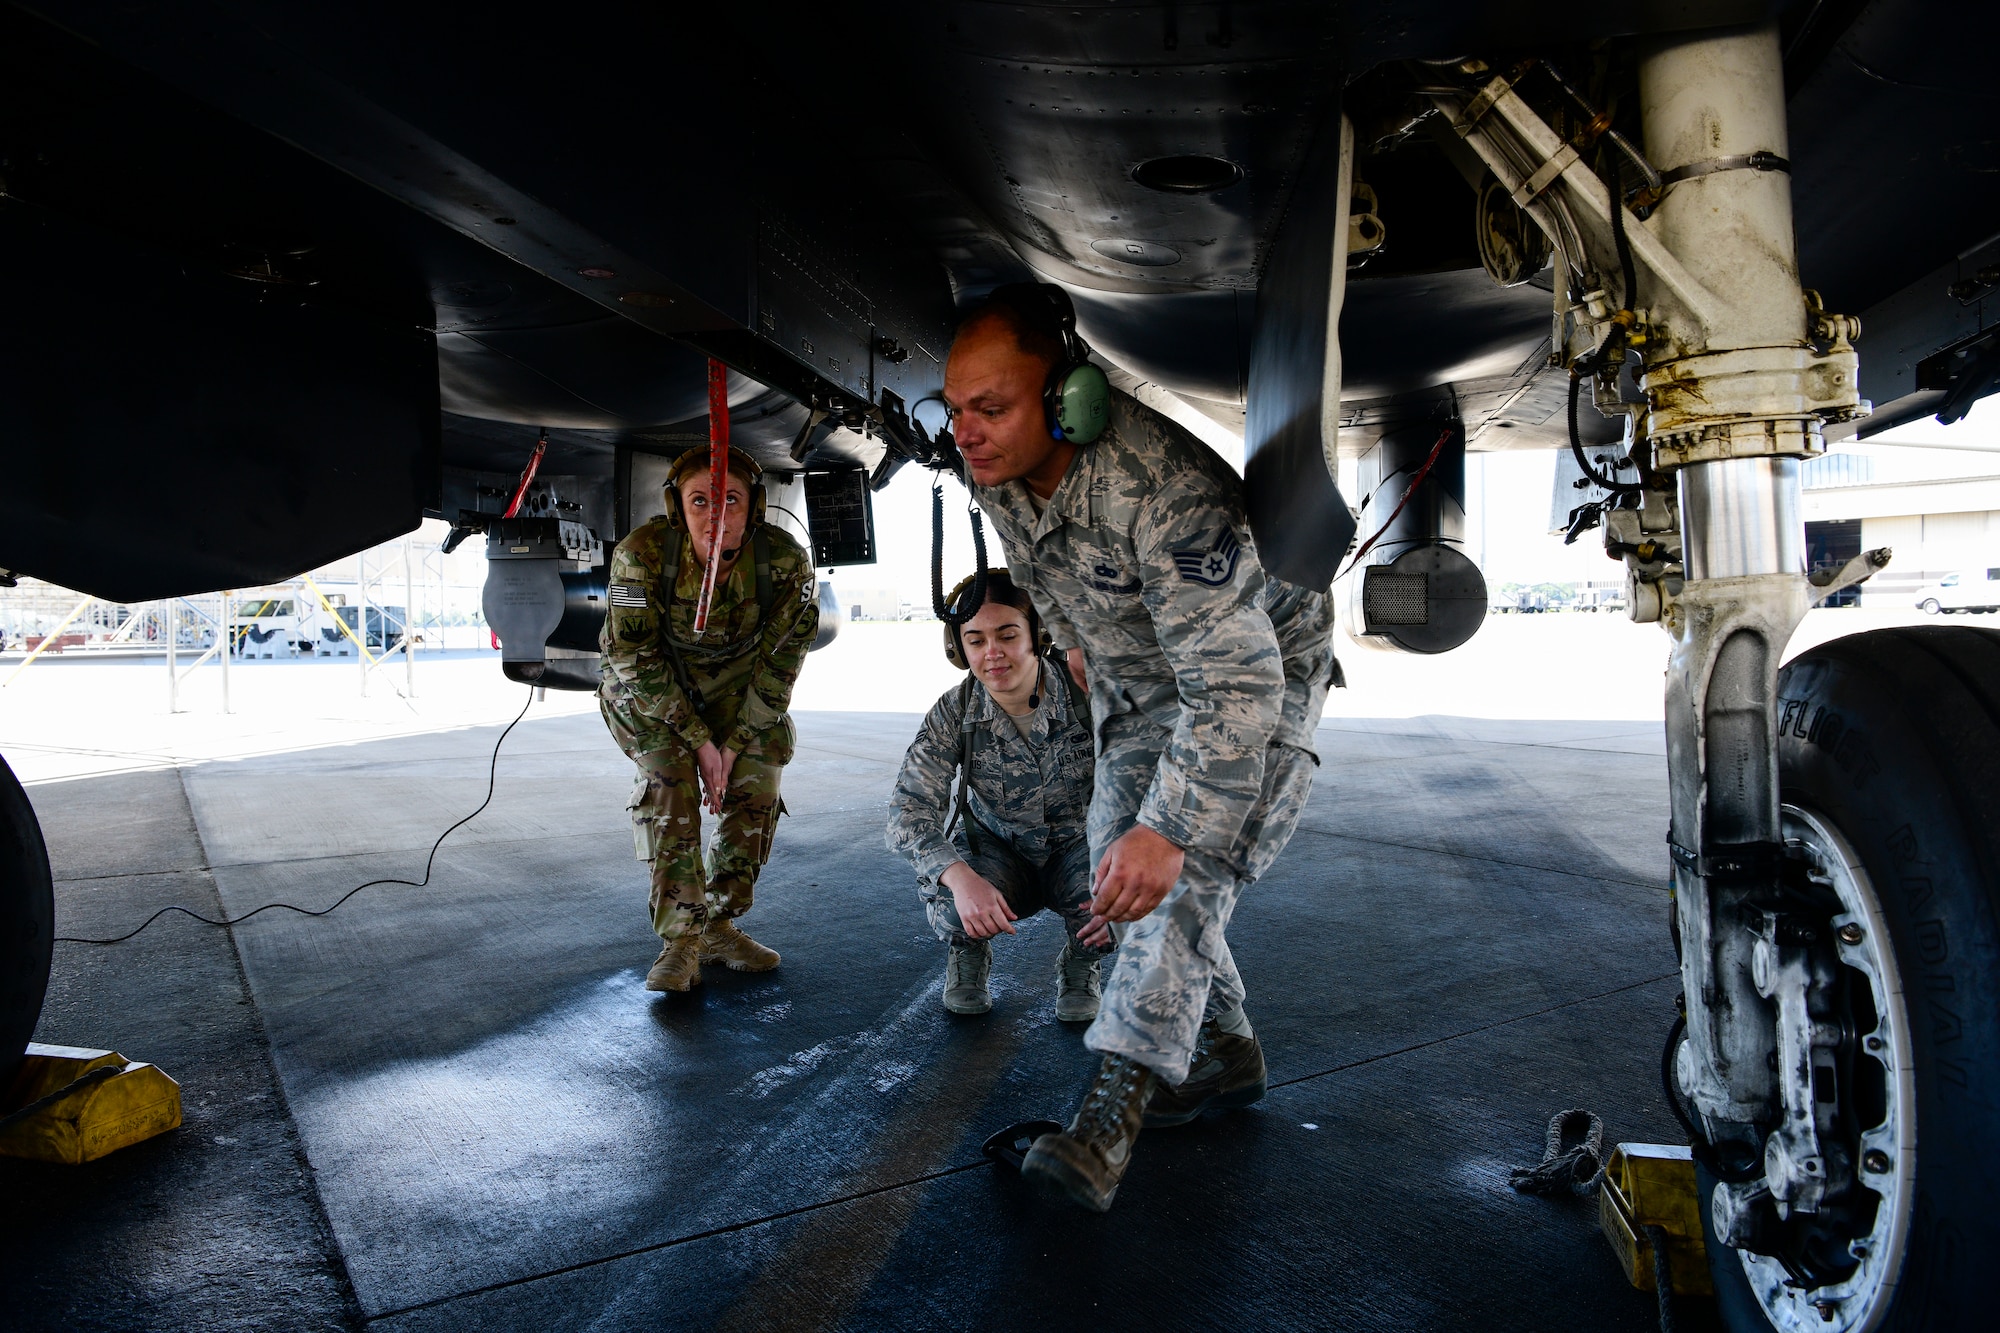 Staff Sgt. Joshua Jennette, 336th Aircraft Maintenance Unit avionics lead, instructs two defenders from the 4th Security Forces Squadron on different parts of the F-15E Strike Eagle during the Combat Support Wing exercise, April 17, 2019, at Seymour Johnson Air Force Base, North Carolina. 110 Airmen from 15 bases participated in the exercise. (U.S. Air Force photo by Senior Airman Kenneth Boyton)